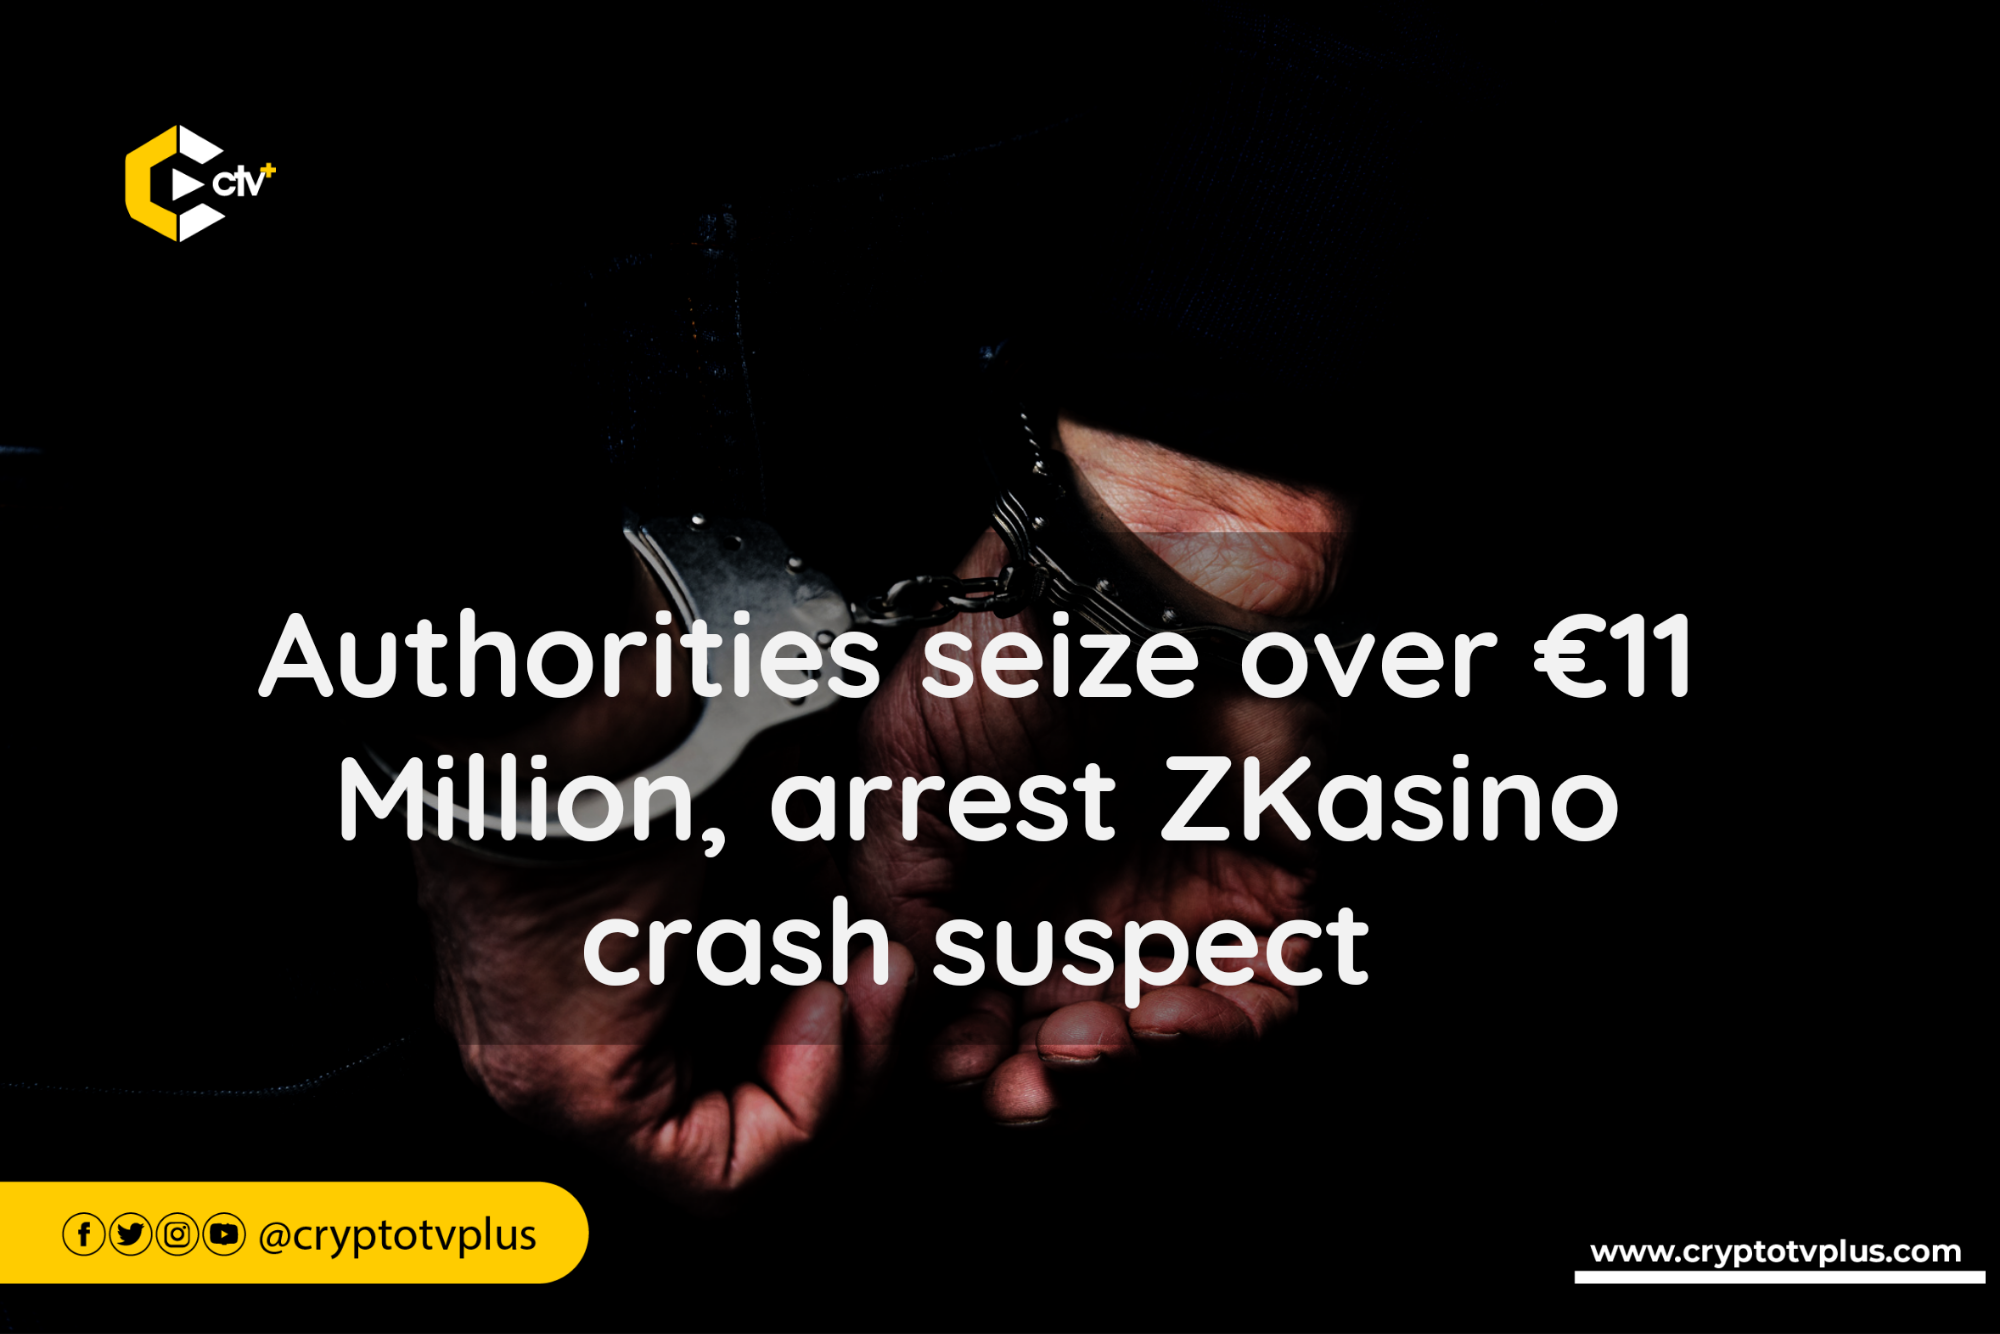 Authorities seize over €11 million and arrest a suspect in connection with the ZKasino crash, a major breakthrough in the investigation.